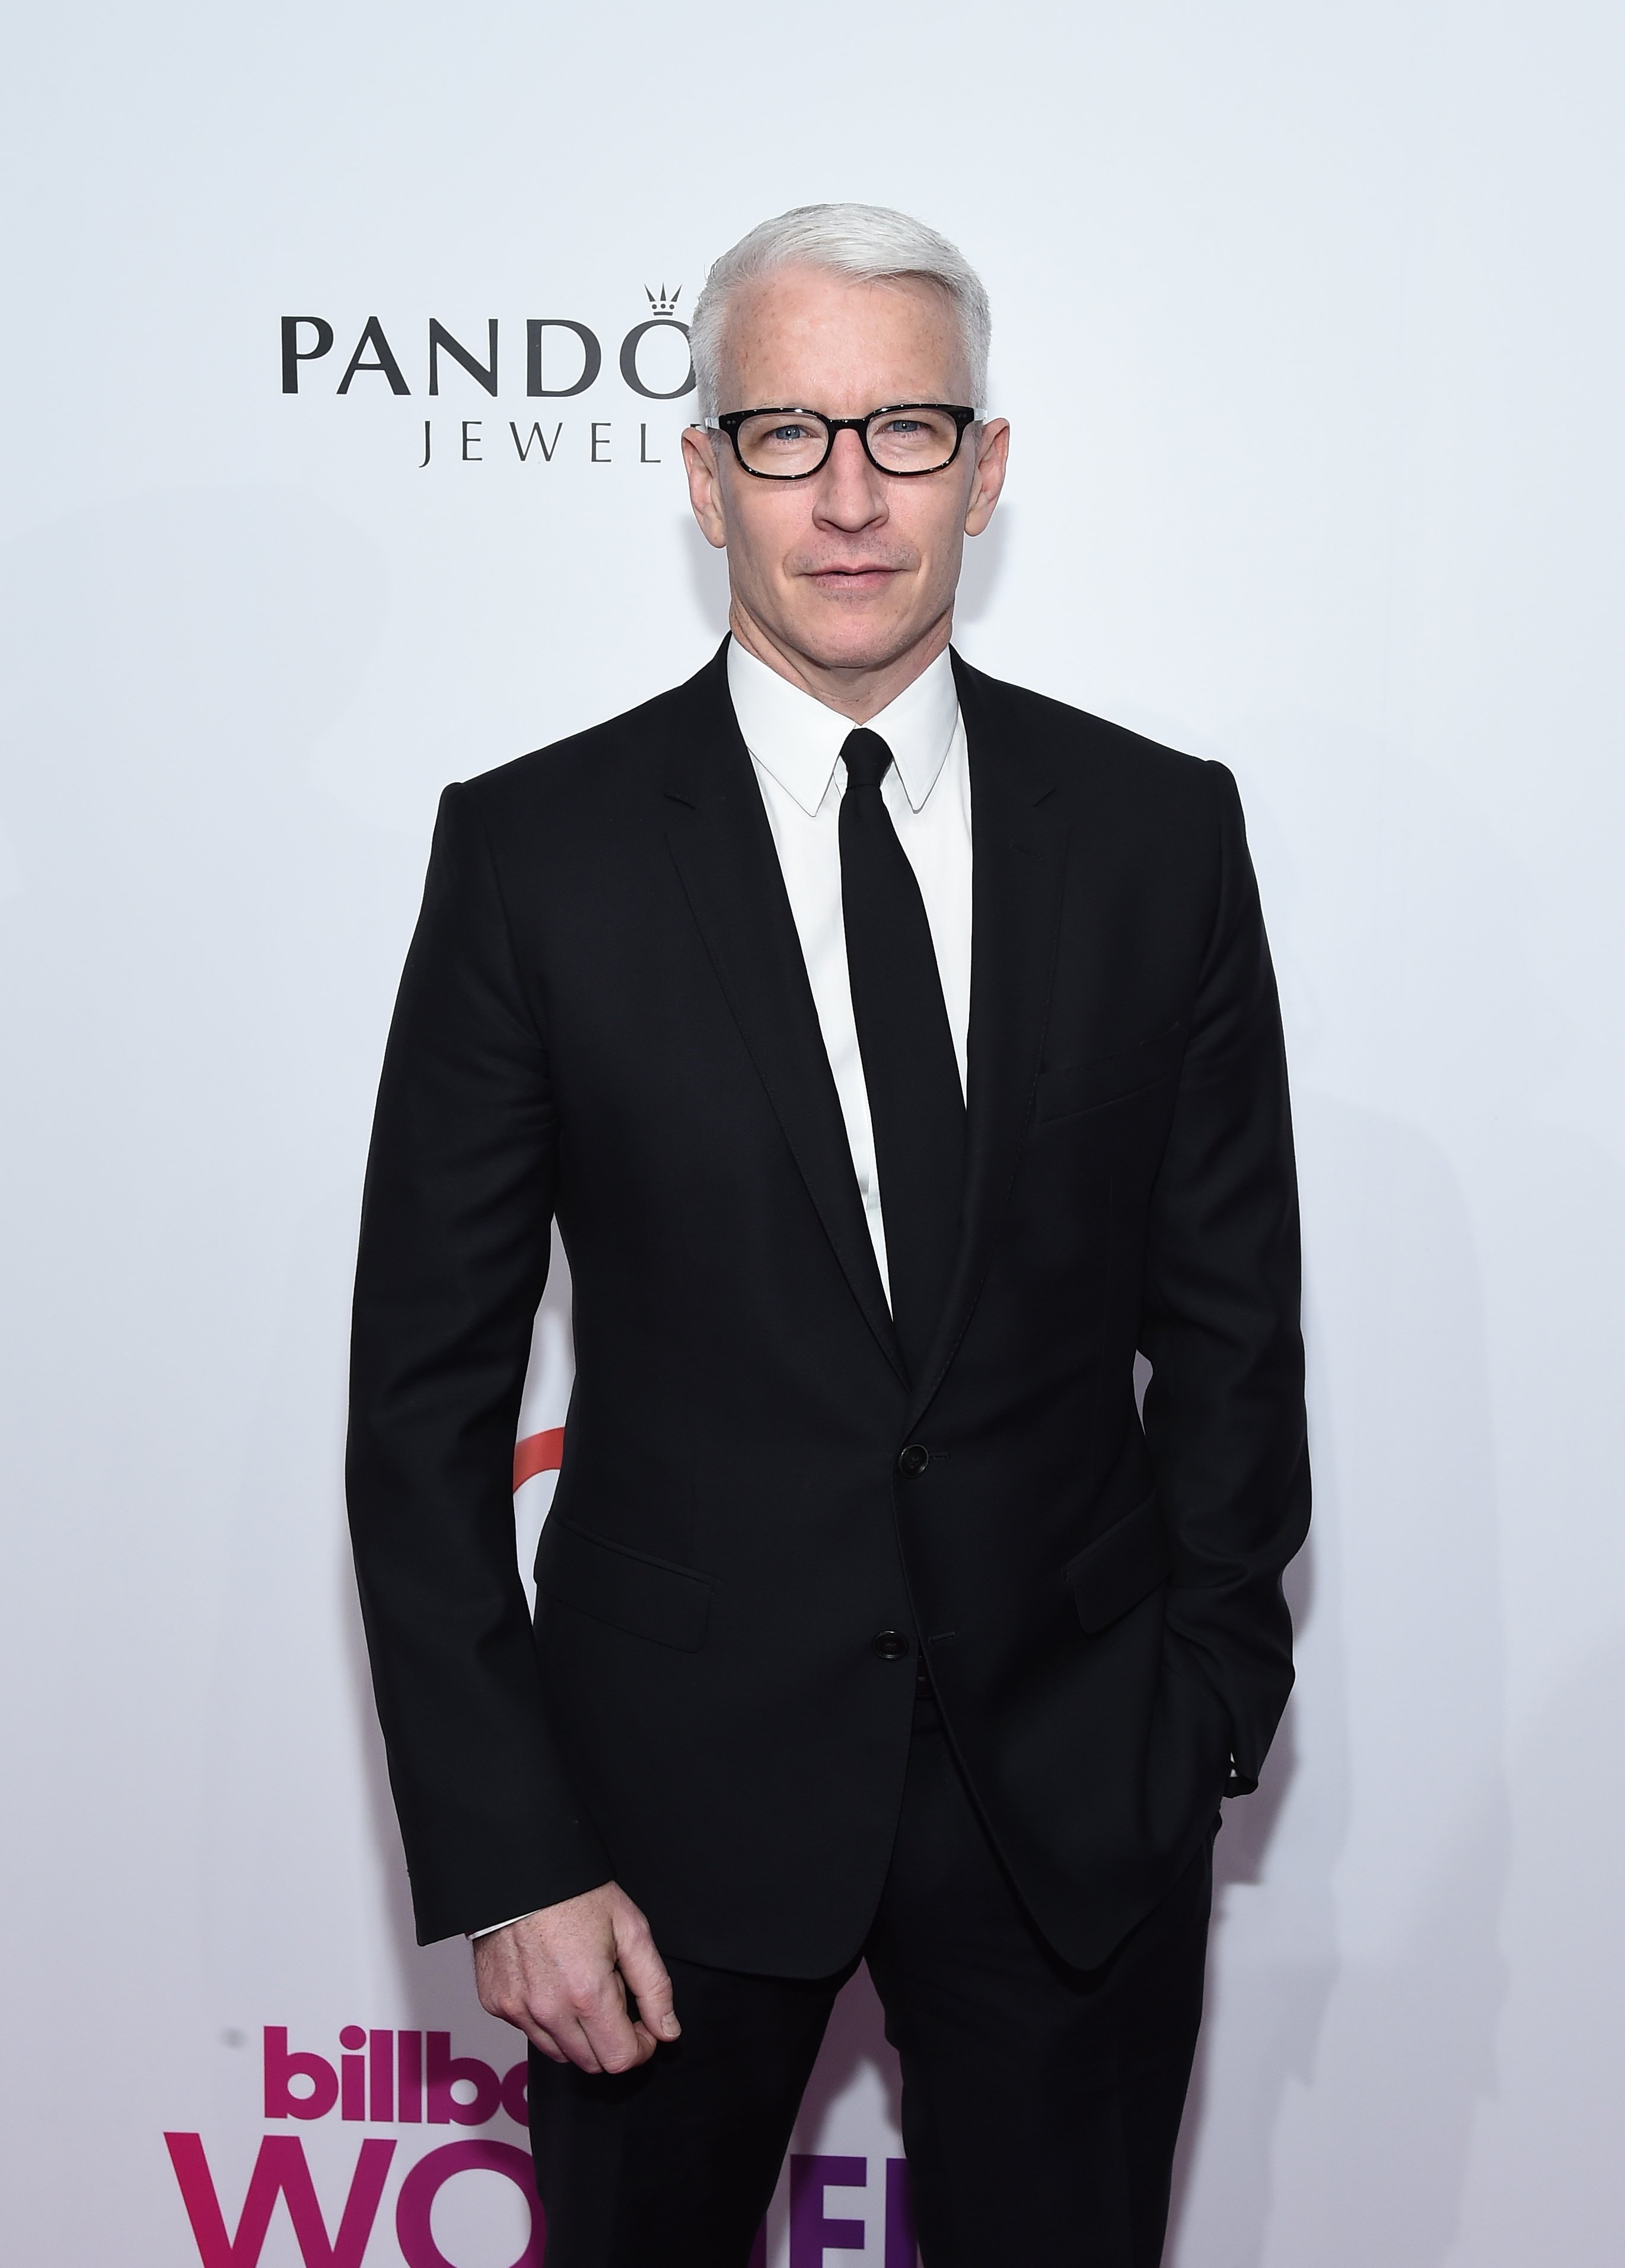 Anderson Cooper attends Billboard Women In Music 2016 Airing December 12th On Lifetime at Pier 36 on December 9, 2016 in New York City. | Source: Getty Images